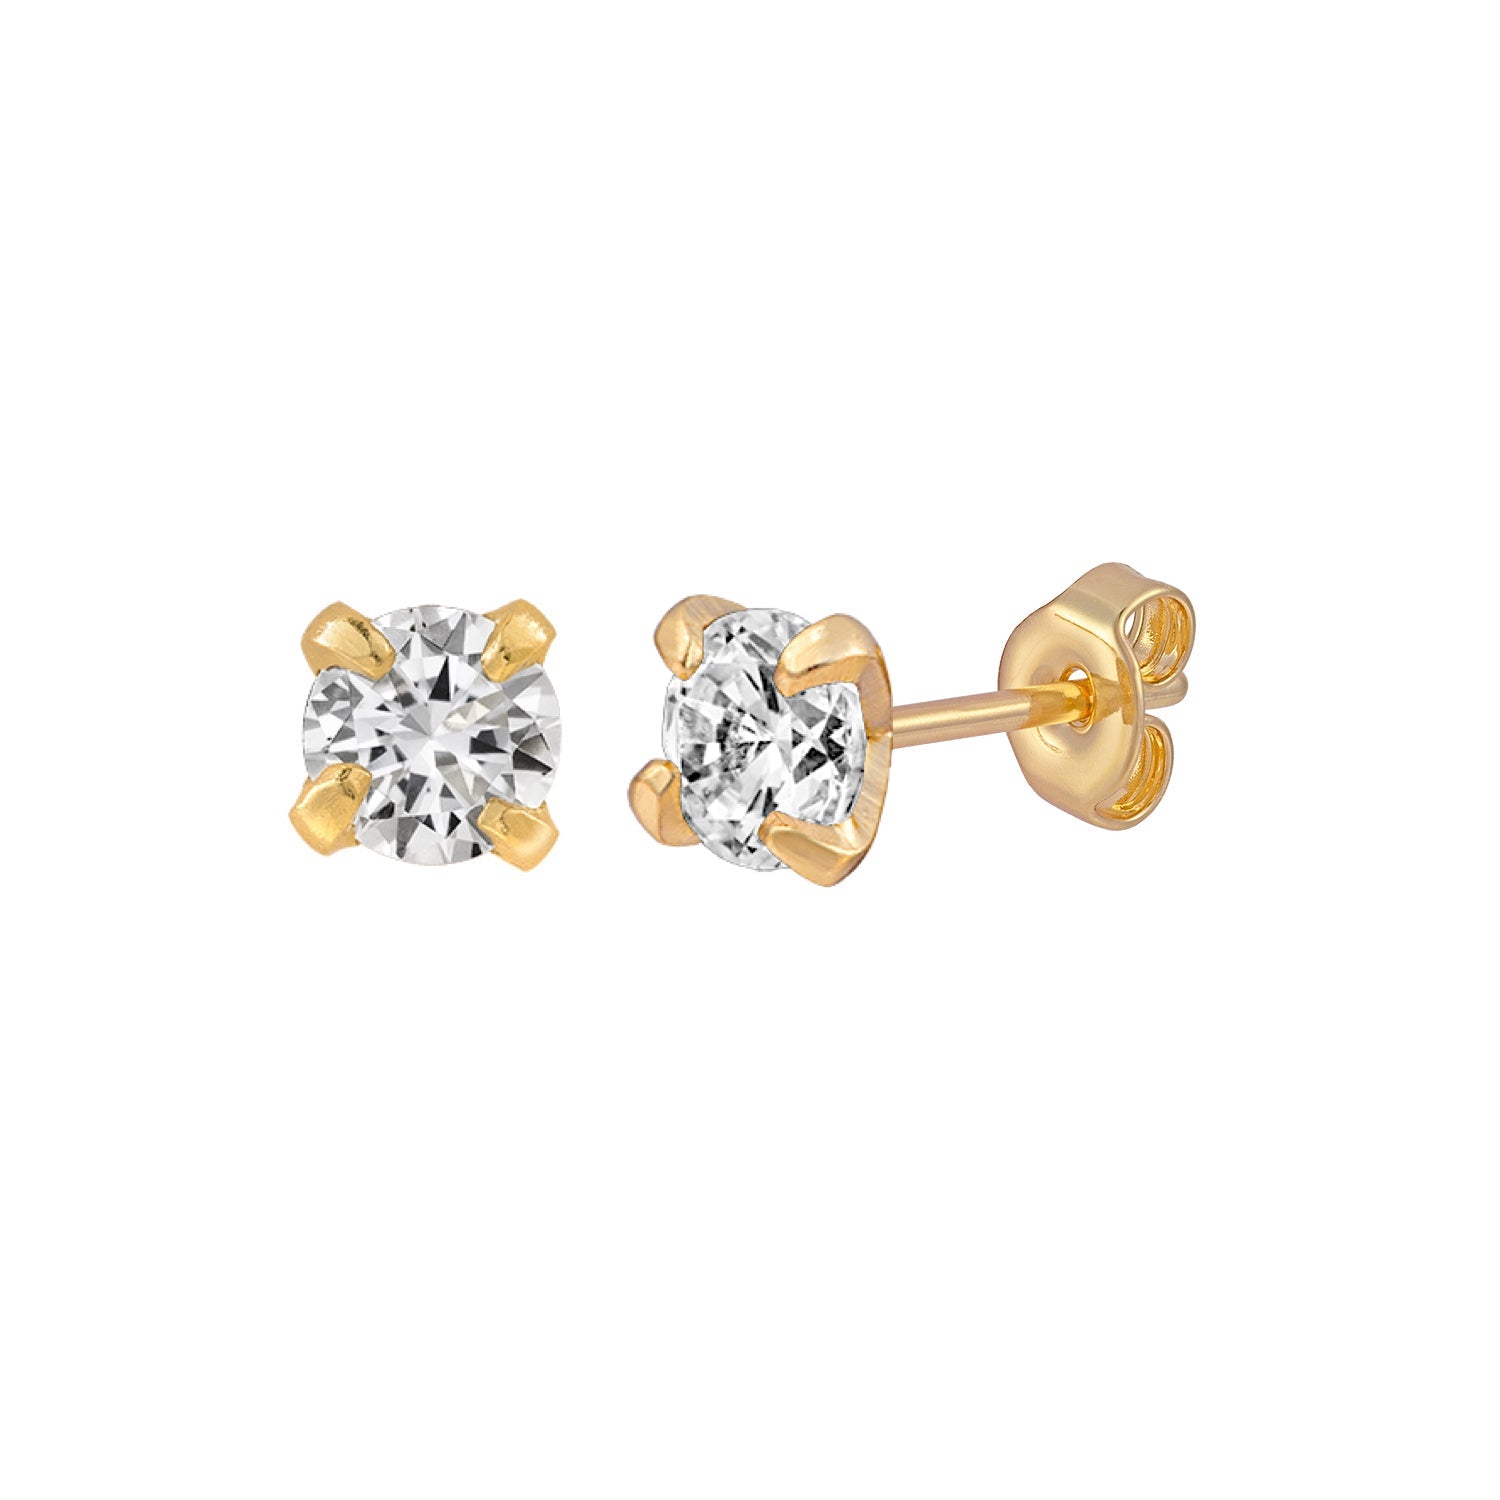 Sparkly Stud Earrings 5mm